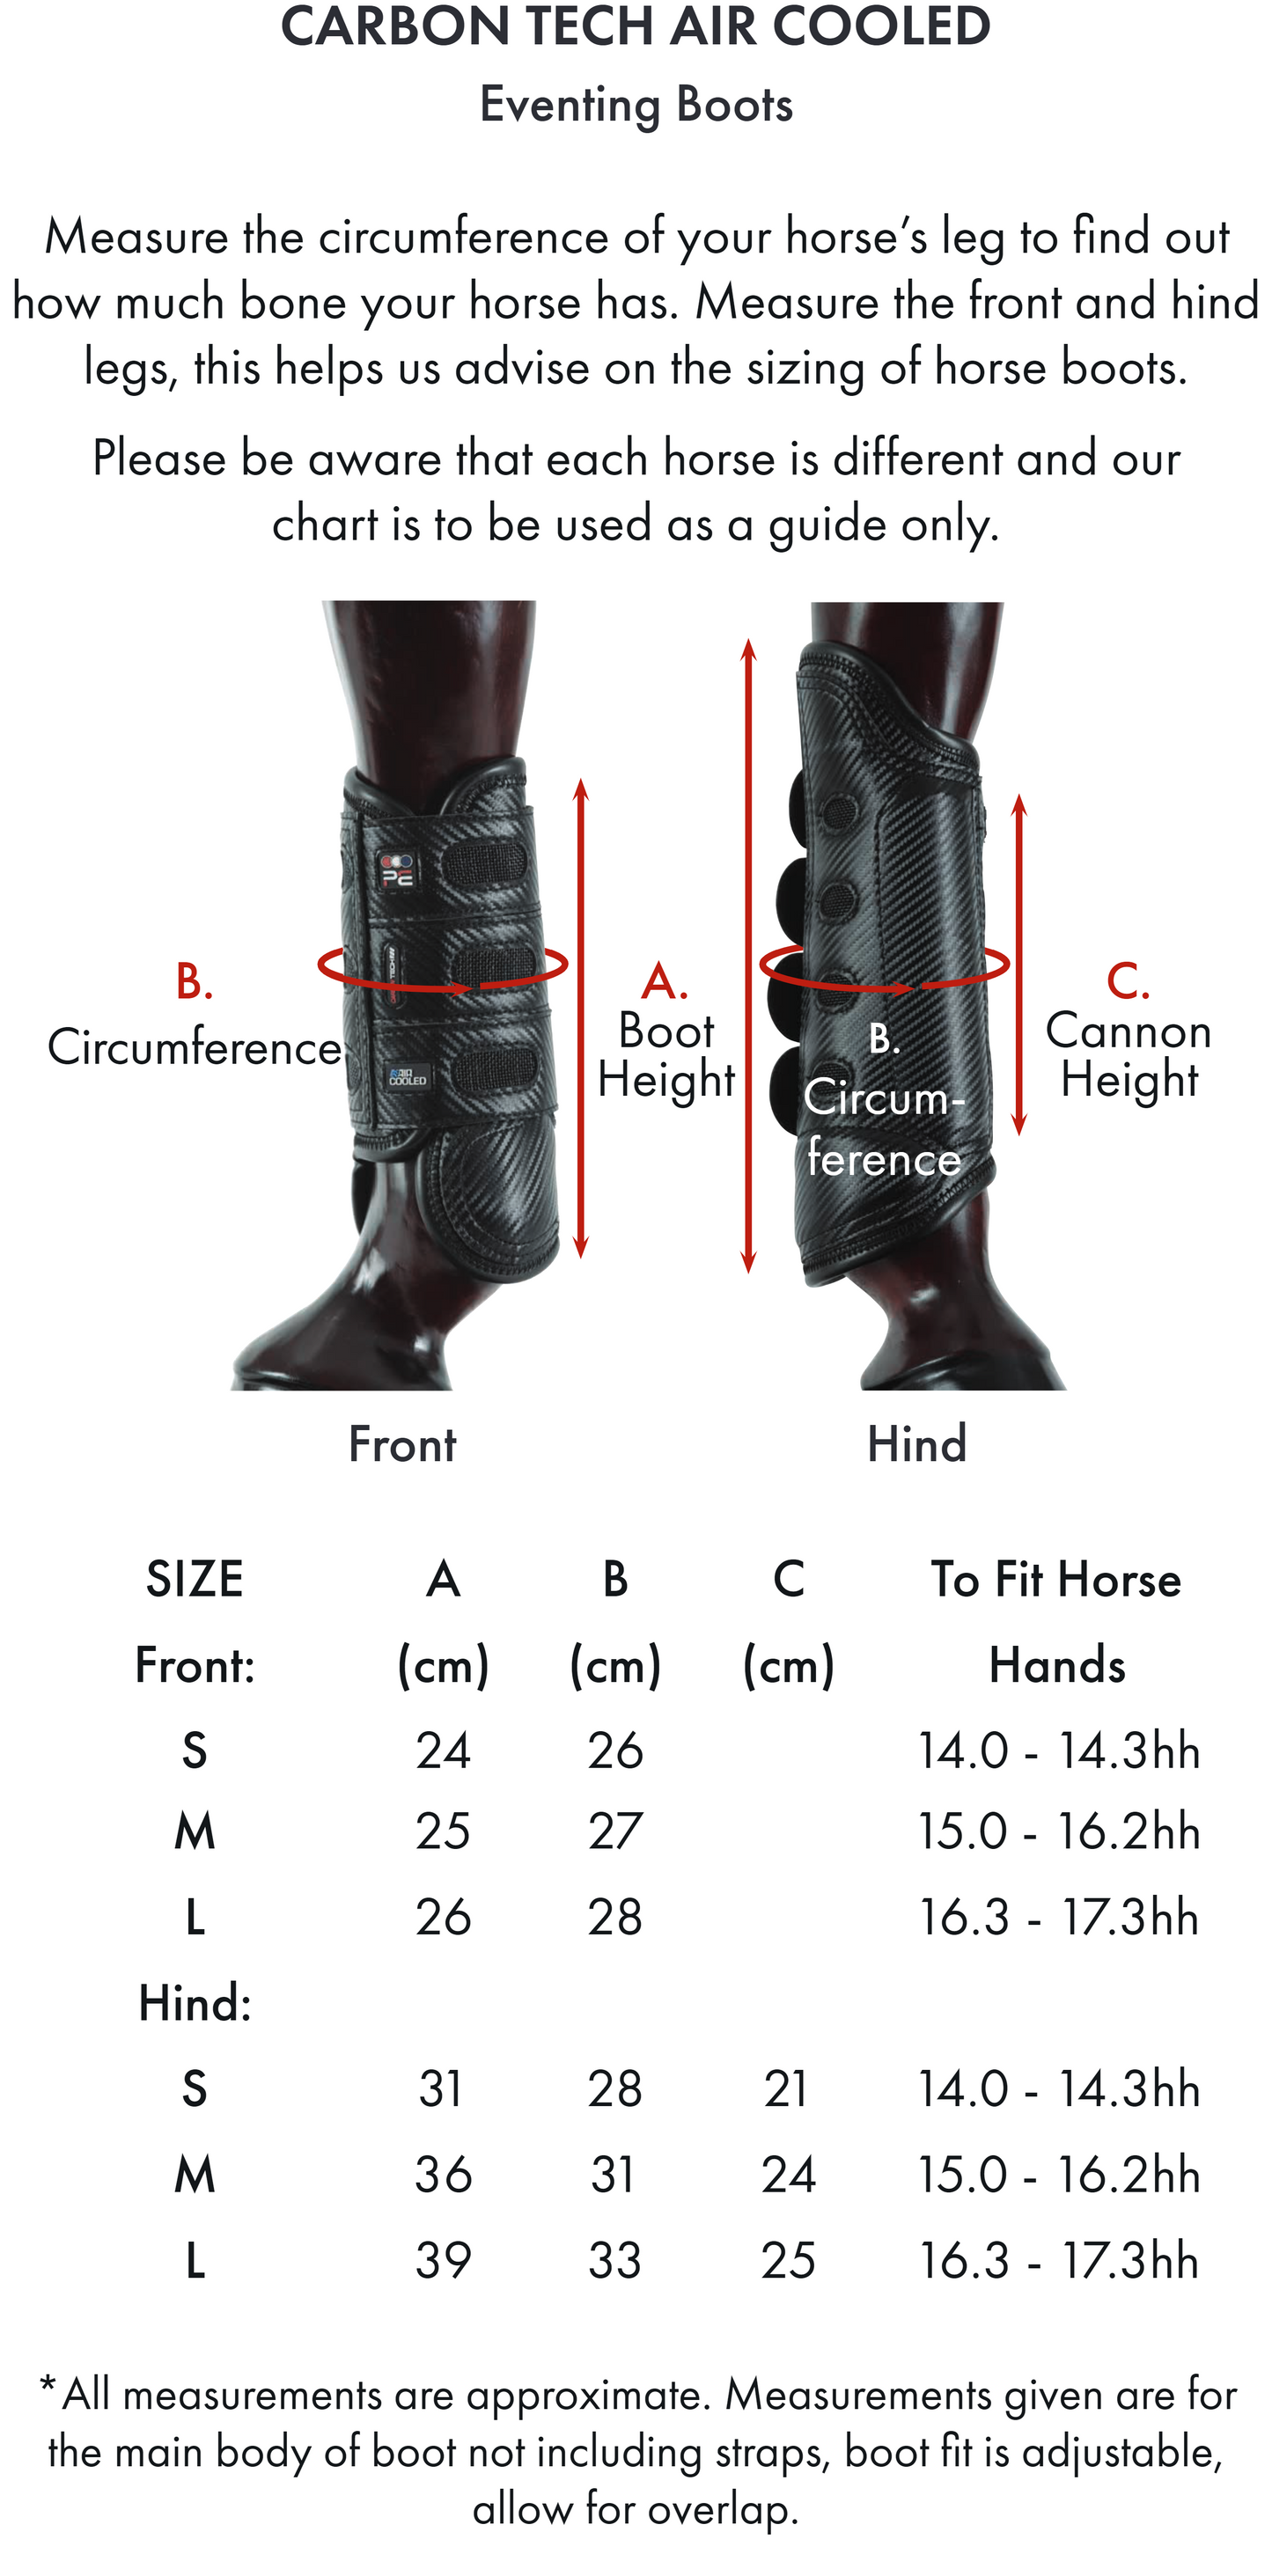 PEI Carbon Tech Air Cooled Eventing Boots Hind